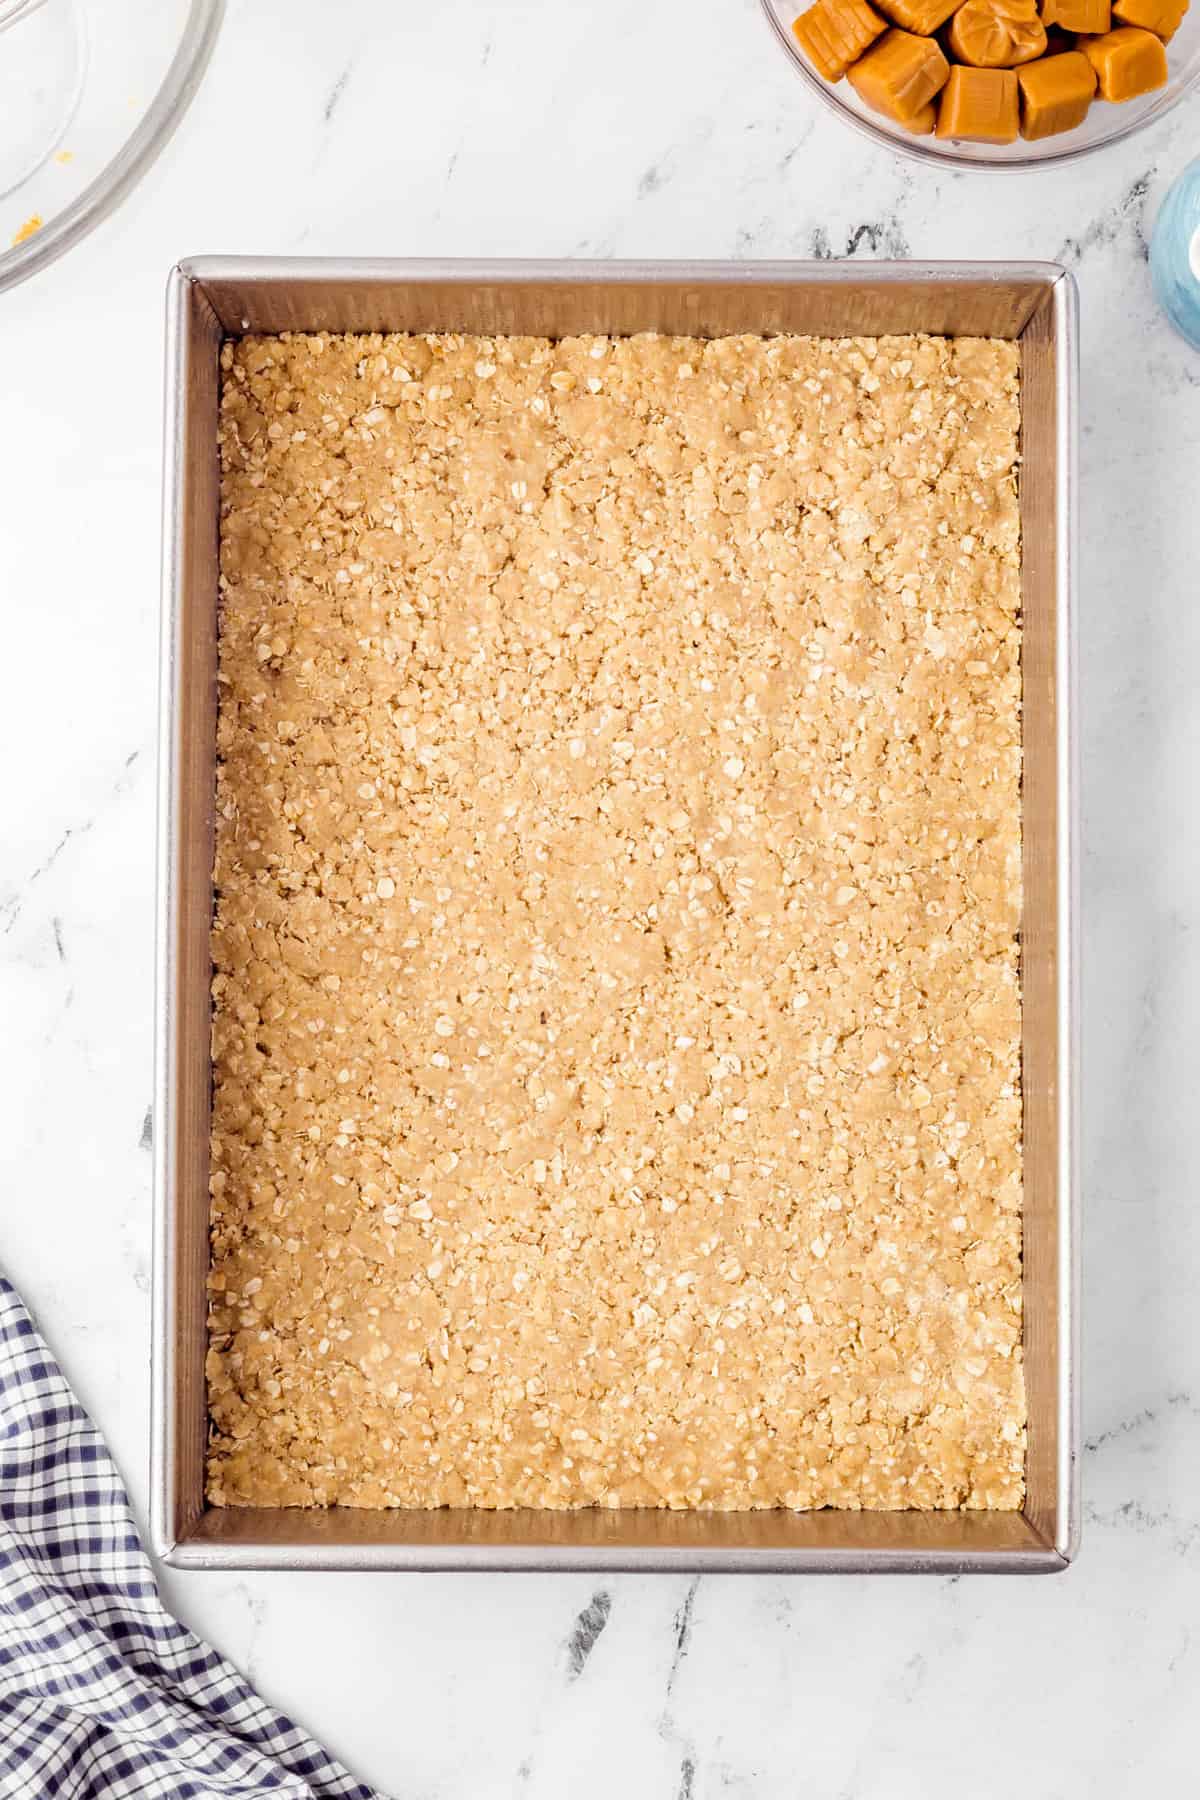 Pressing crust into pan for Caramel Oatmeal Bars